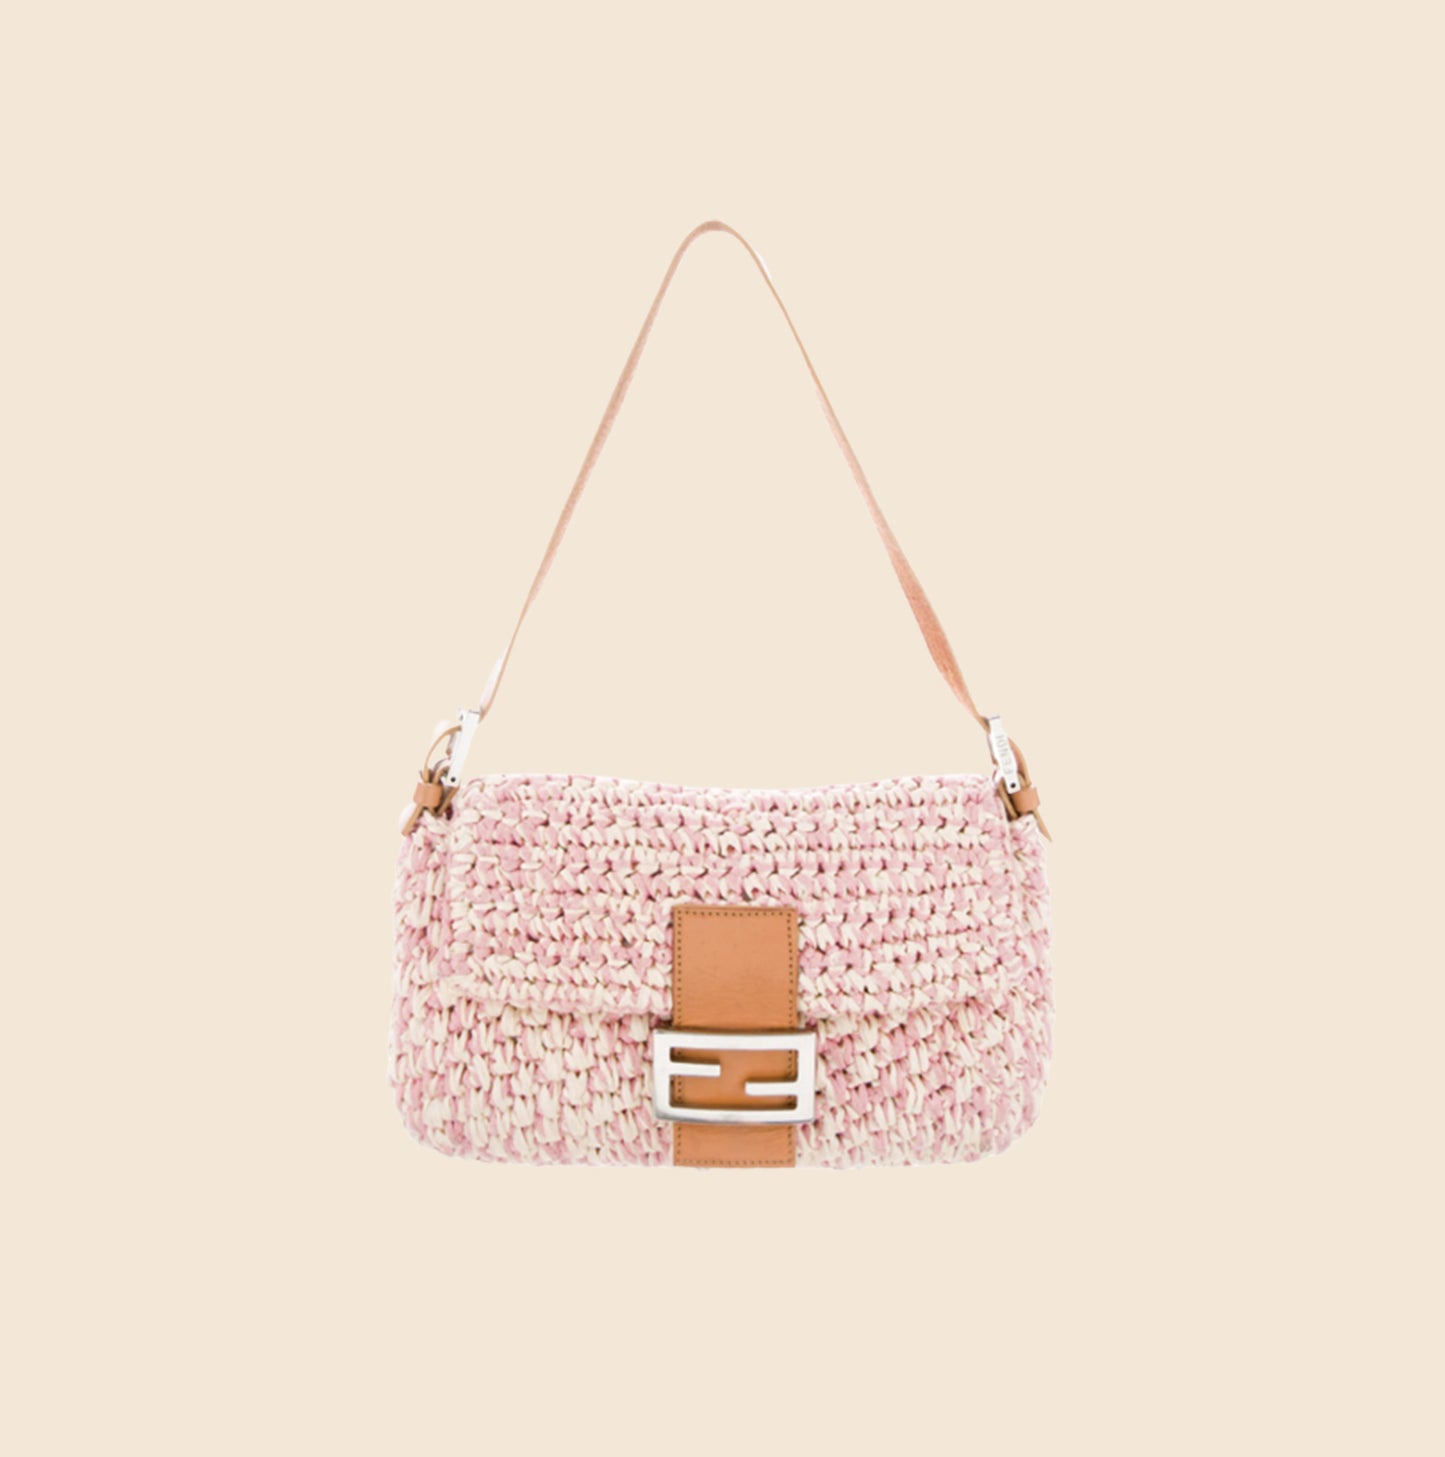 Fendi Baguette Phone Pouch in Pink